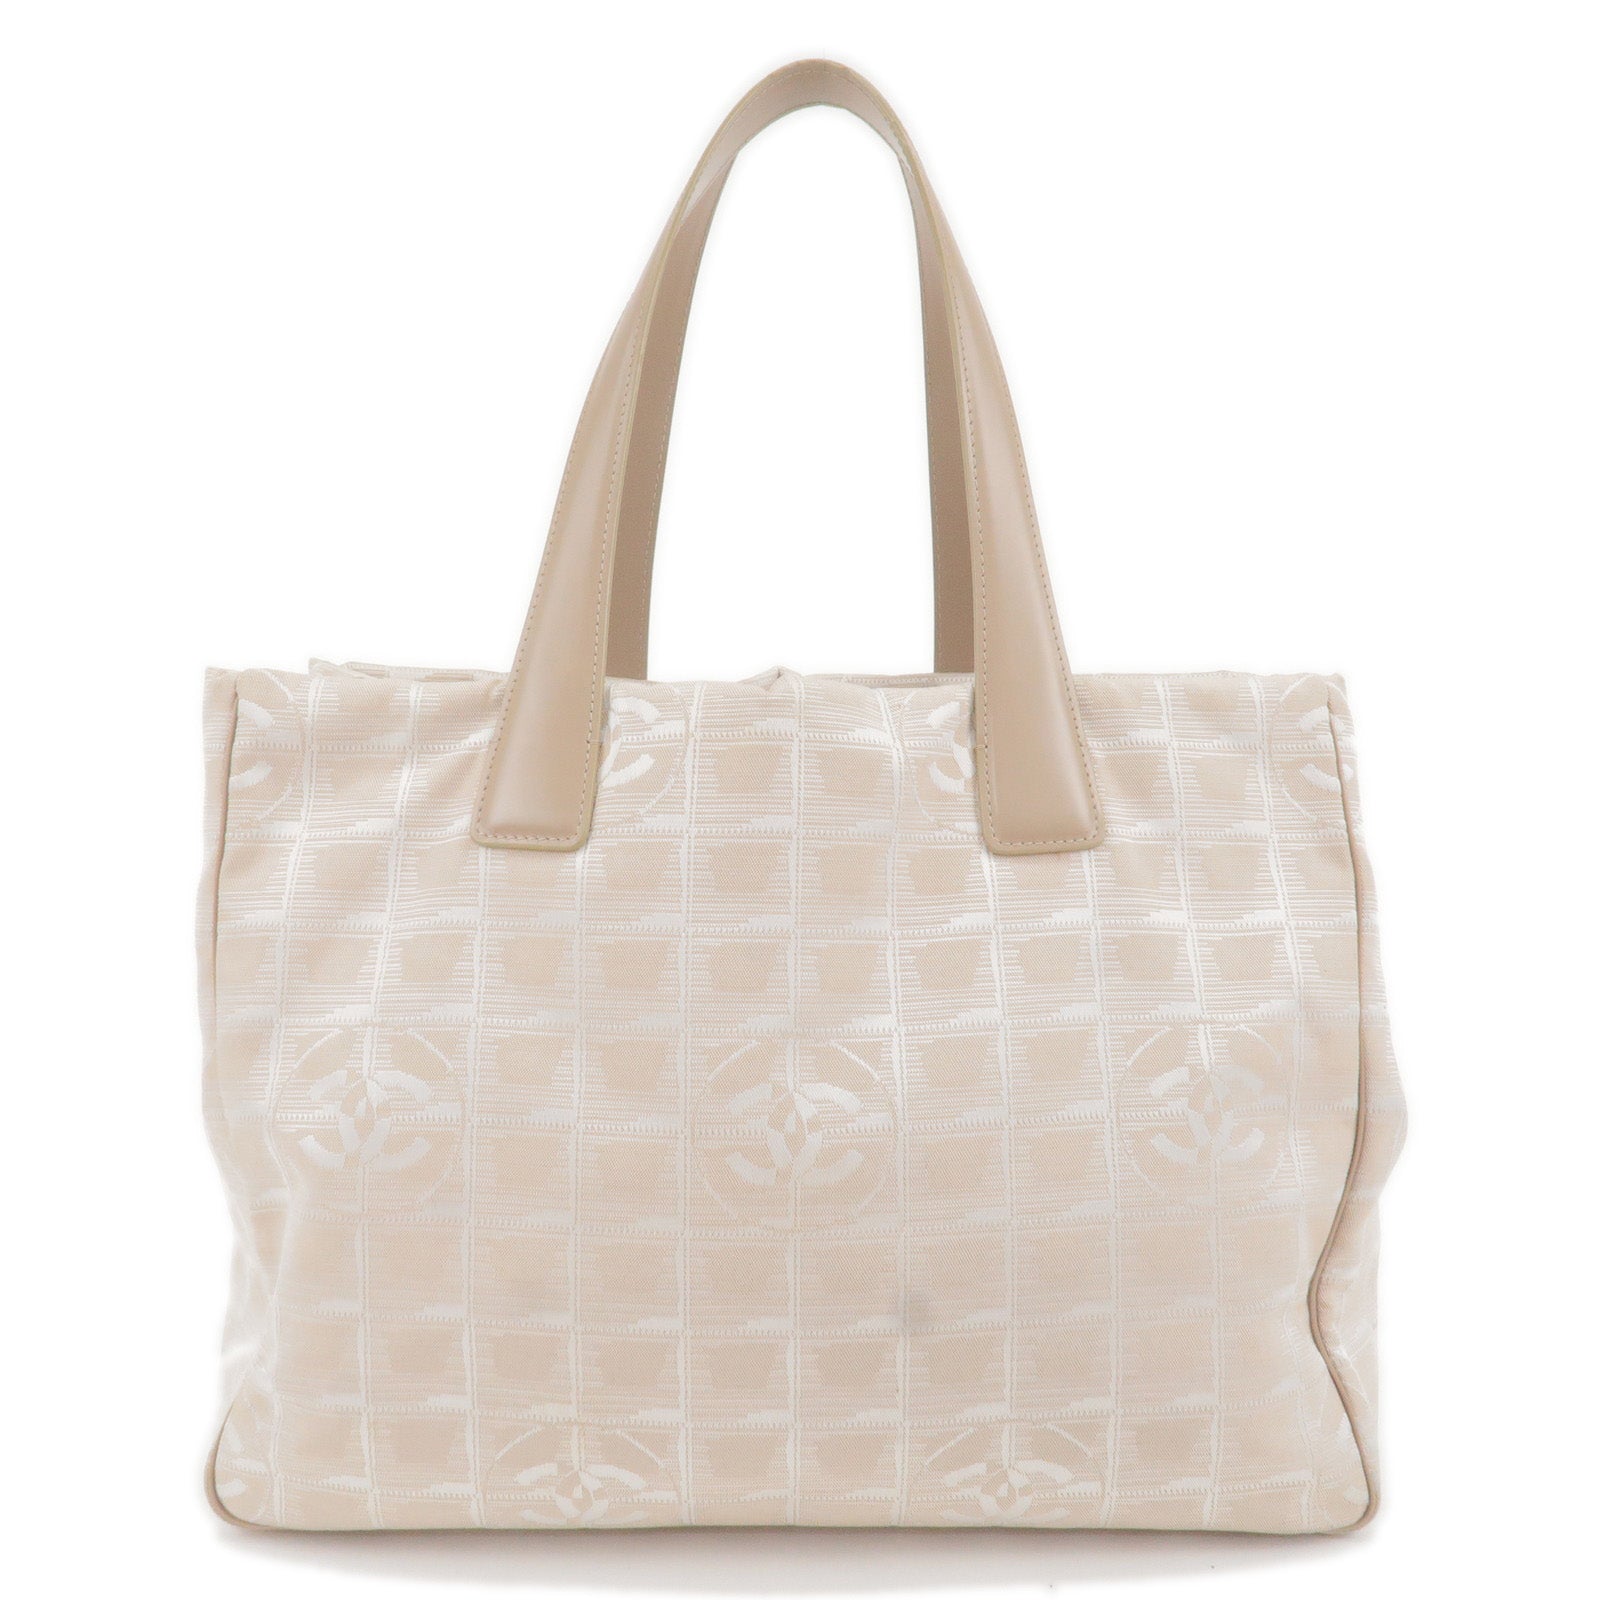 CHANEL-Travel-Line-Nylon-Jacquard-Leather-Tote-Bag-Beige-A15991